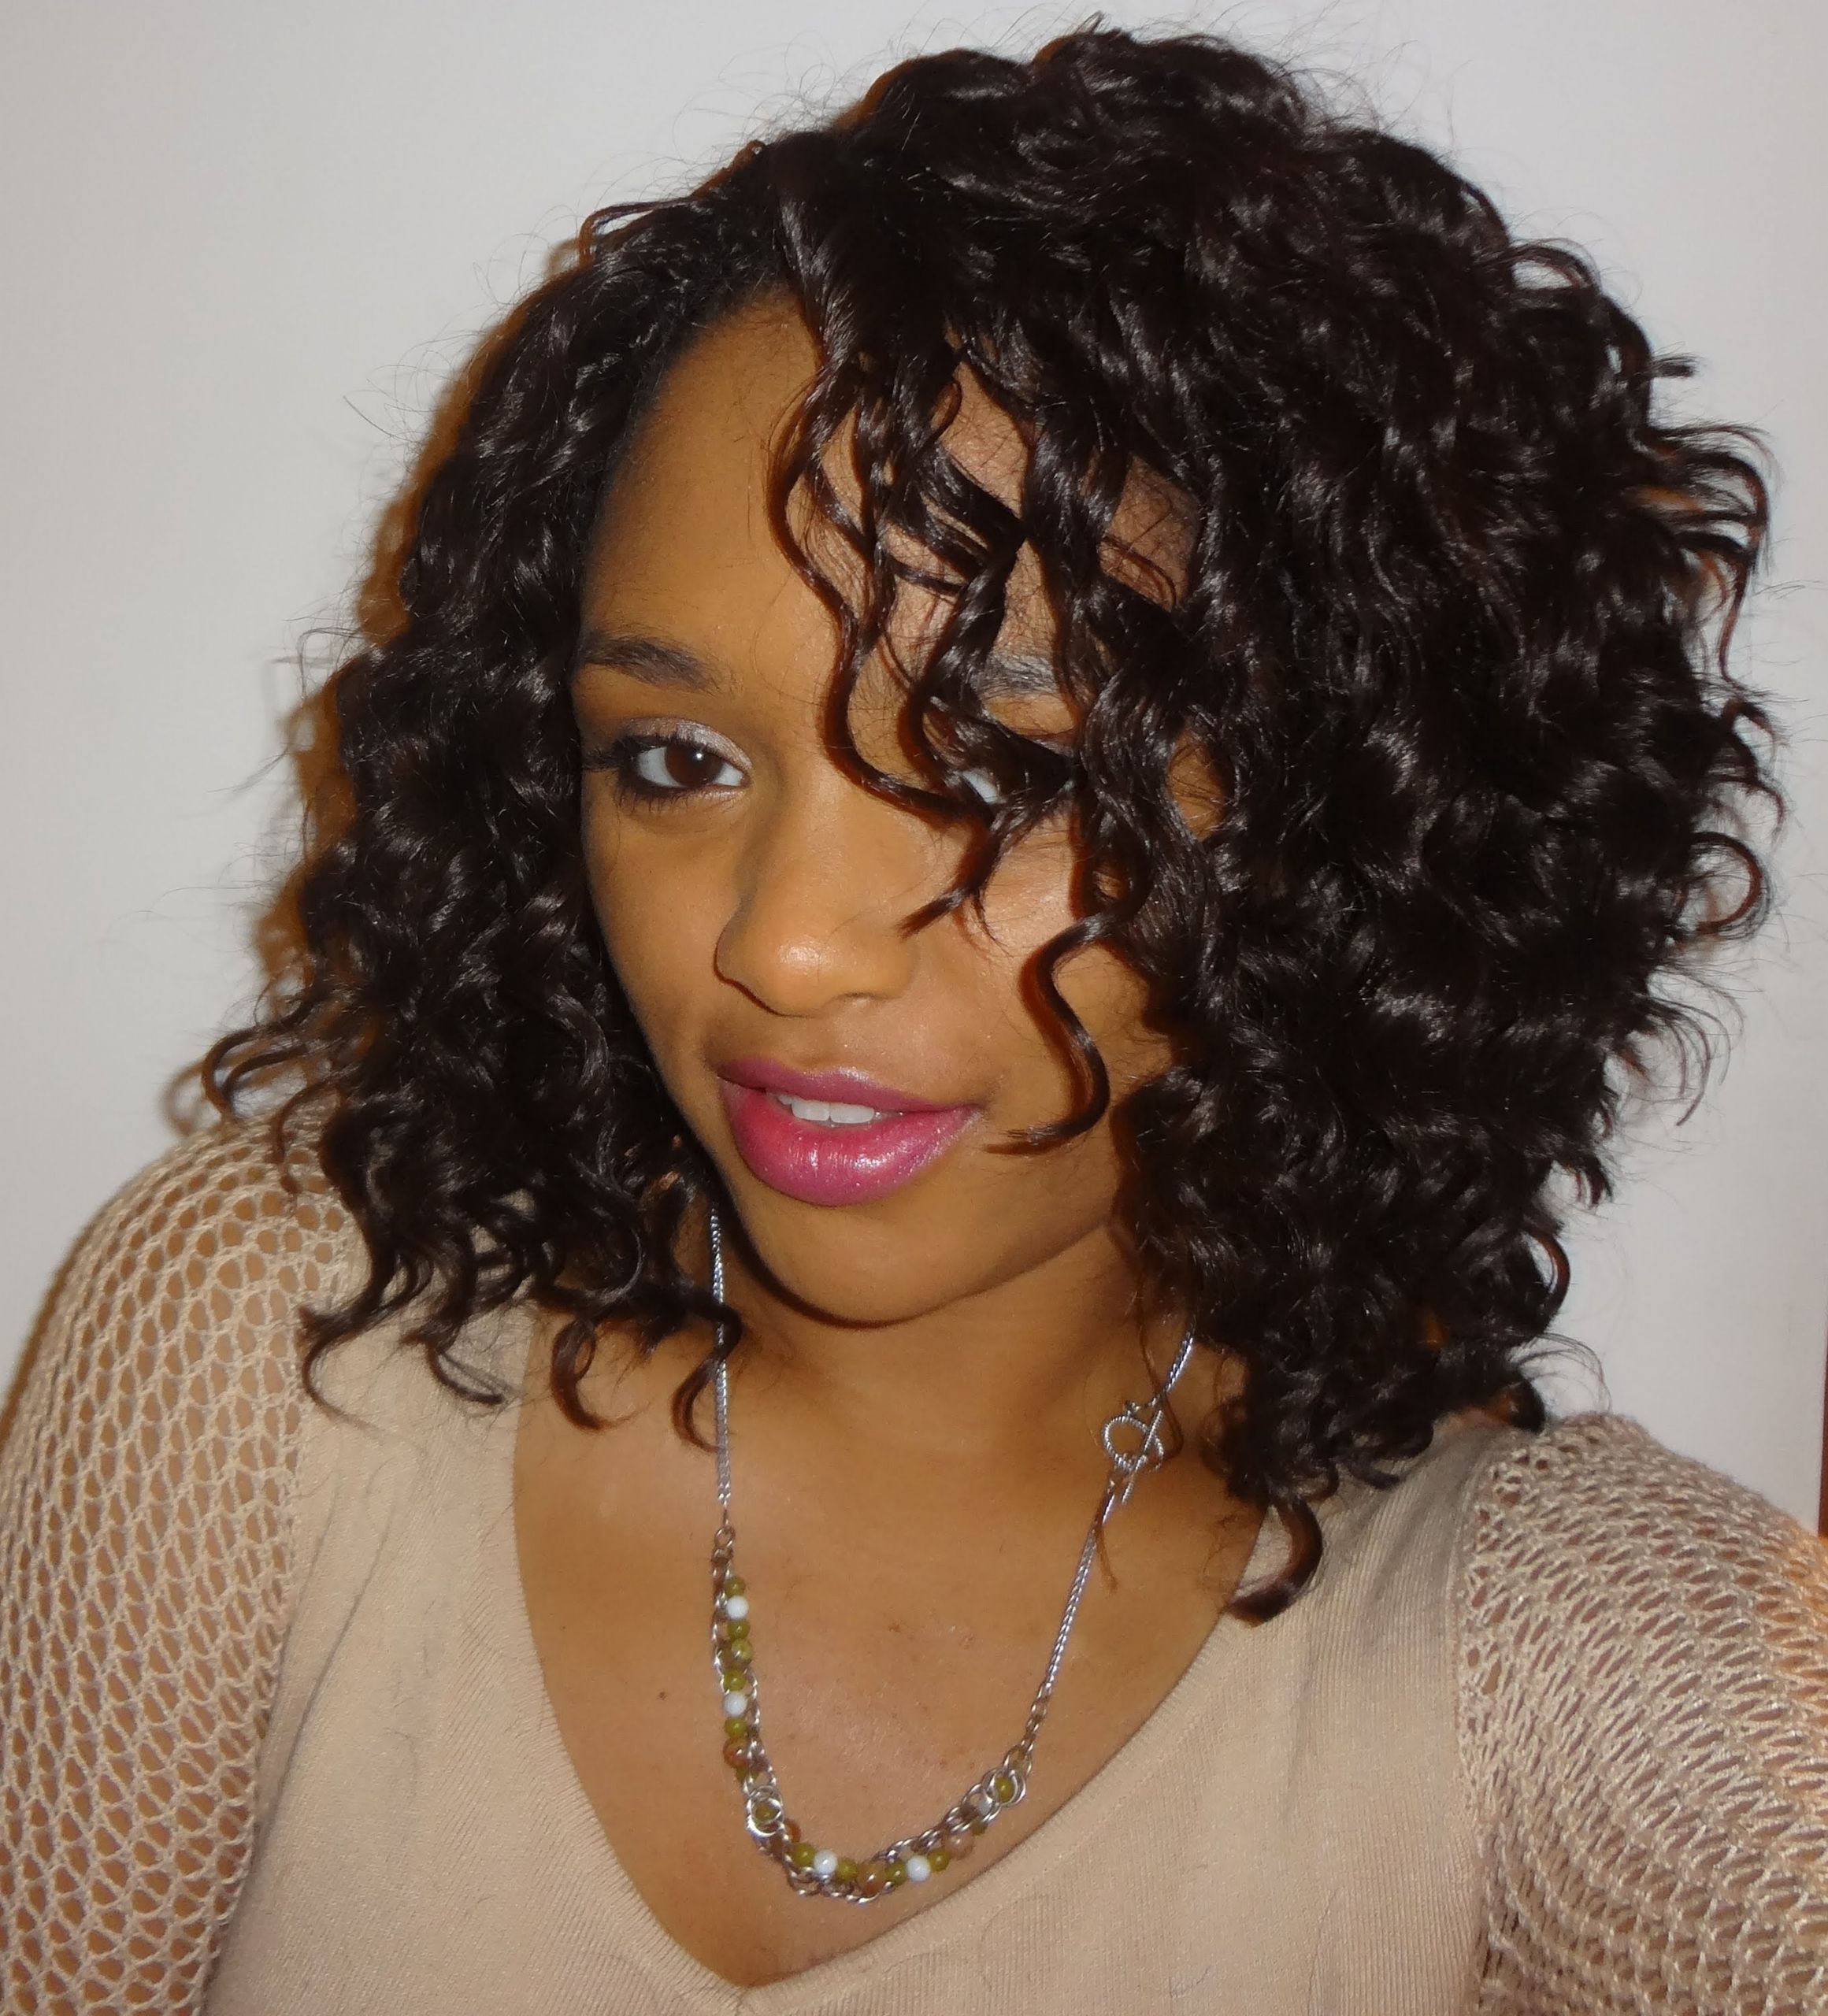 Pictures Of Crochet Braid Hairstyles
 Crochet braids hairstyles Hairstyle for black women